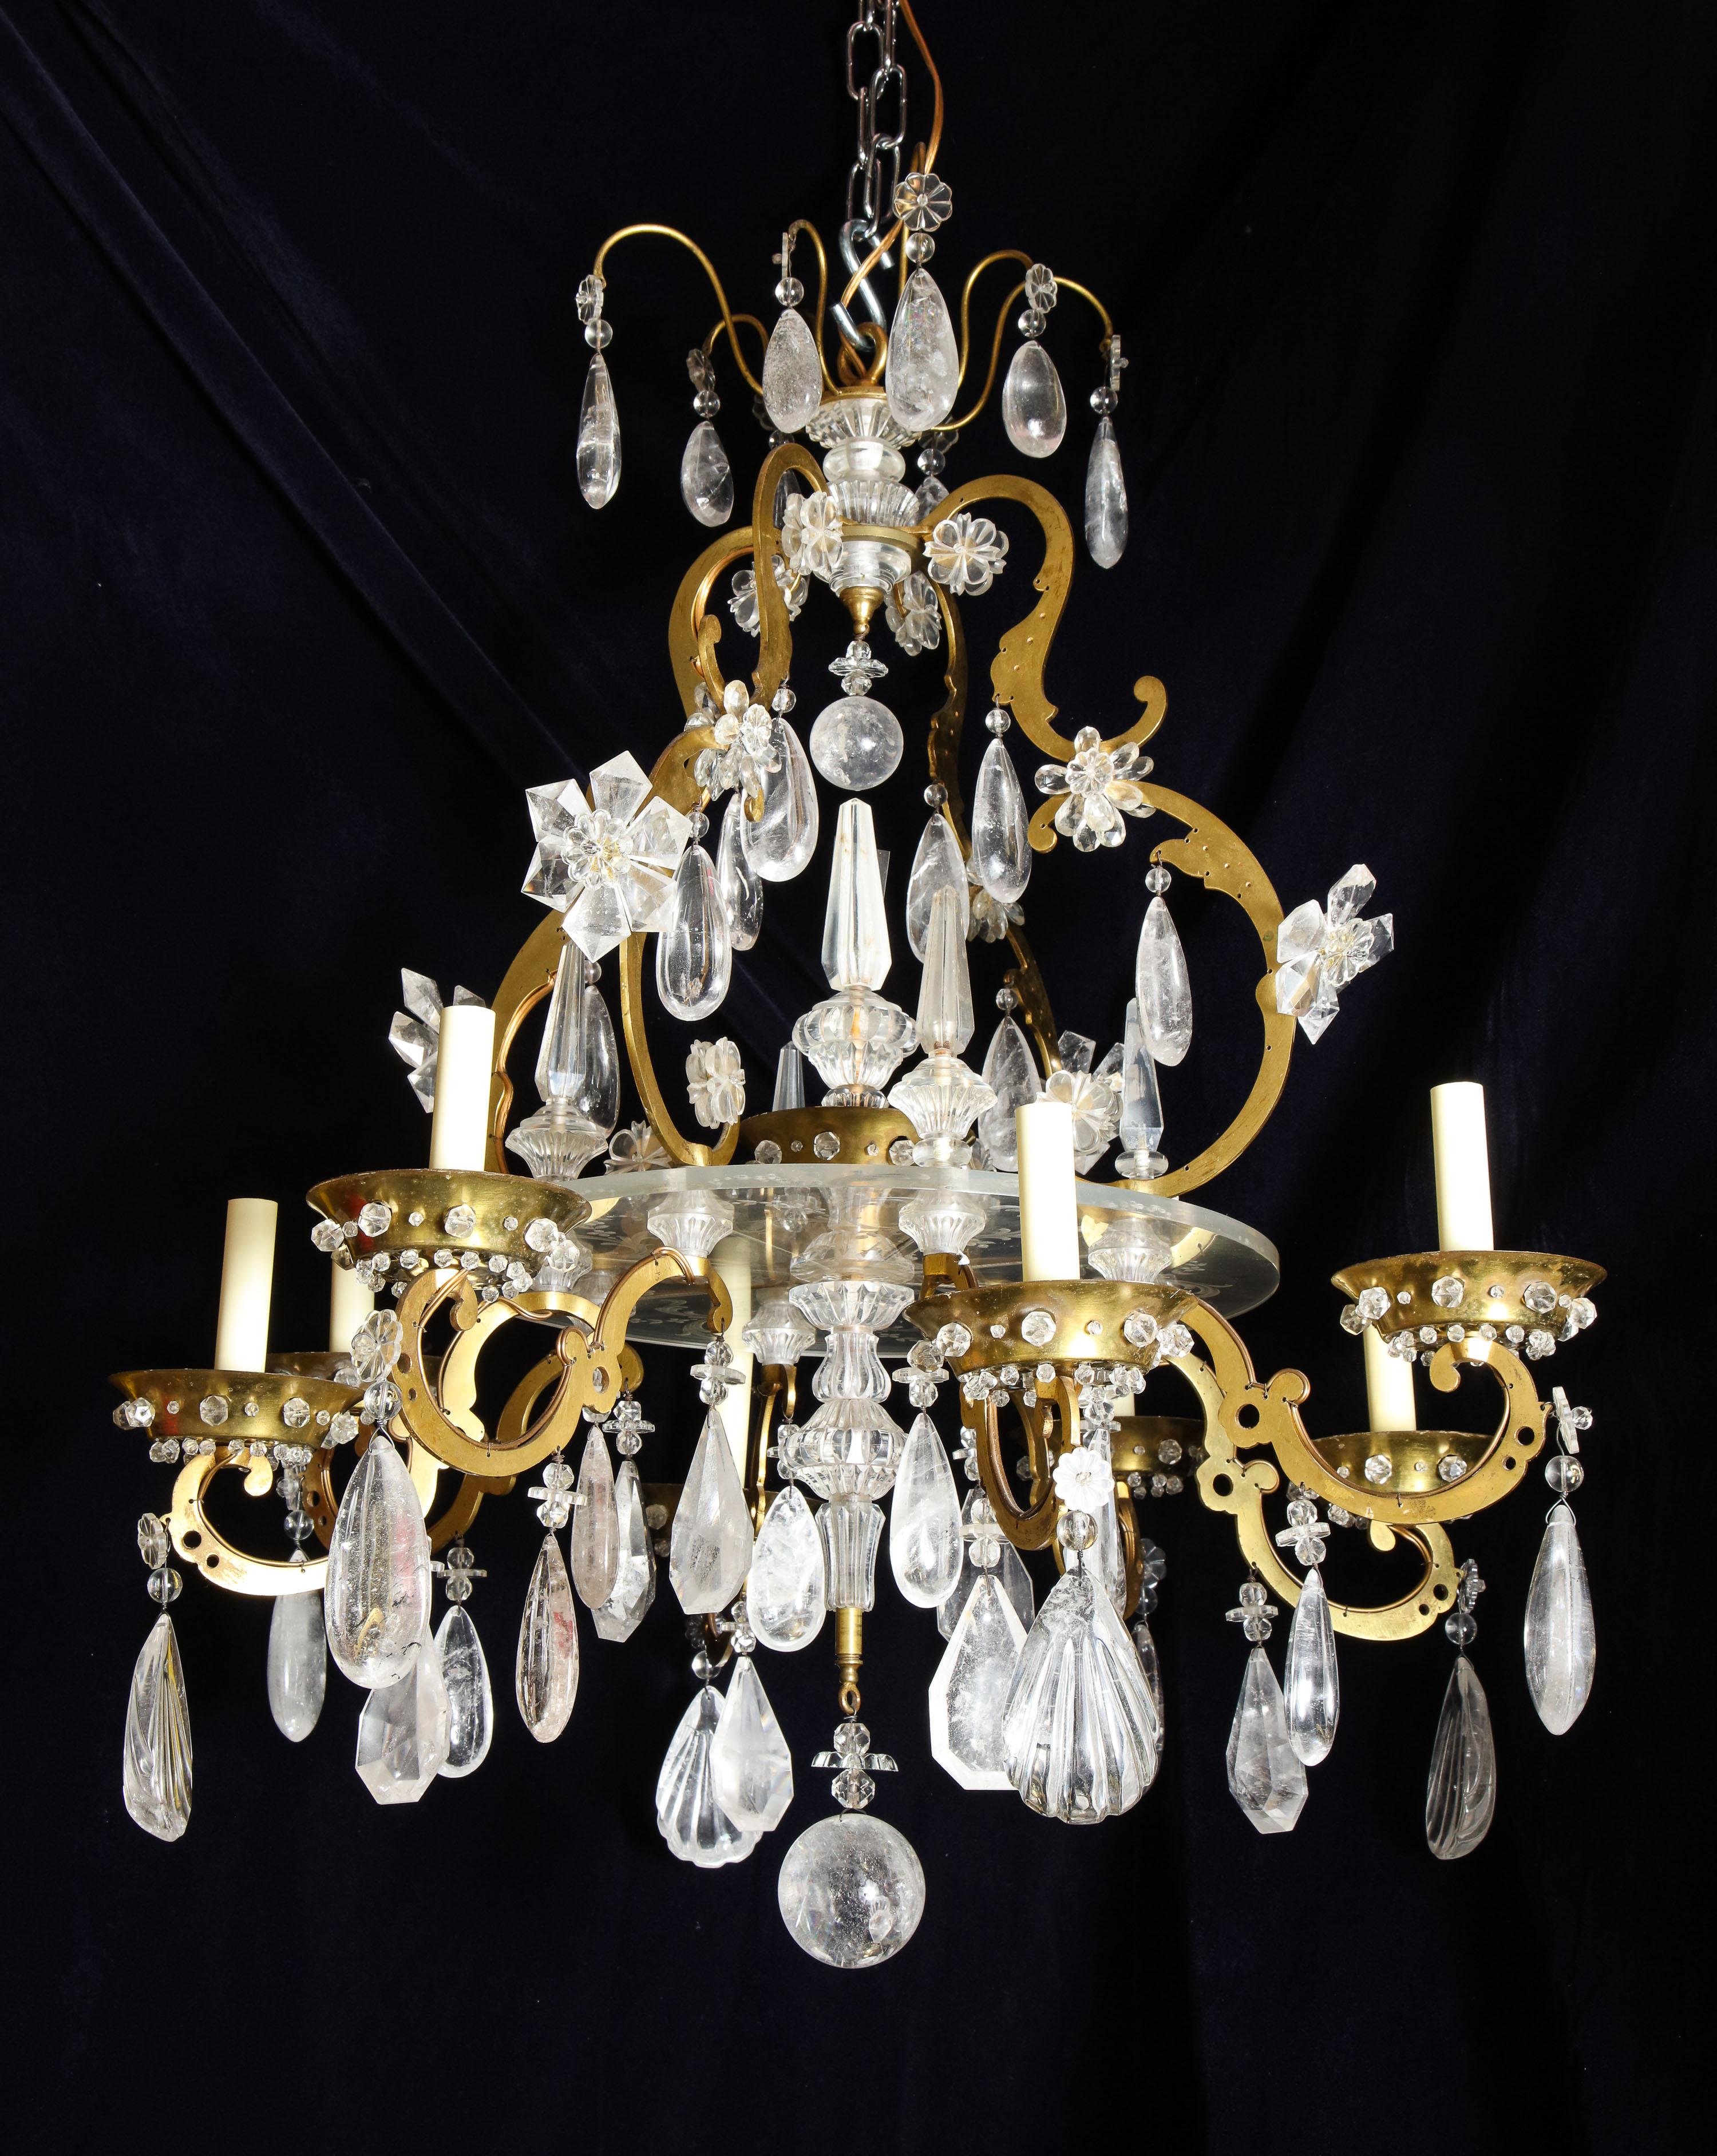 A fine and unusual antique French Louis XVI style gilt bronze. Cut rock crystal and Lucite multi light chandelier of superb workmanship embellished with a central engraved Lucite flat dish and further adorned with cut rock crystal prisms and flowers